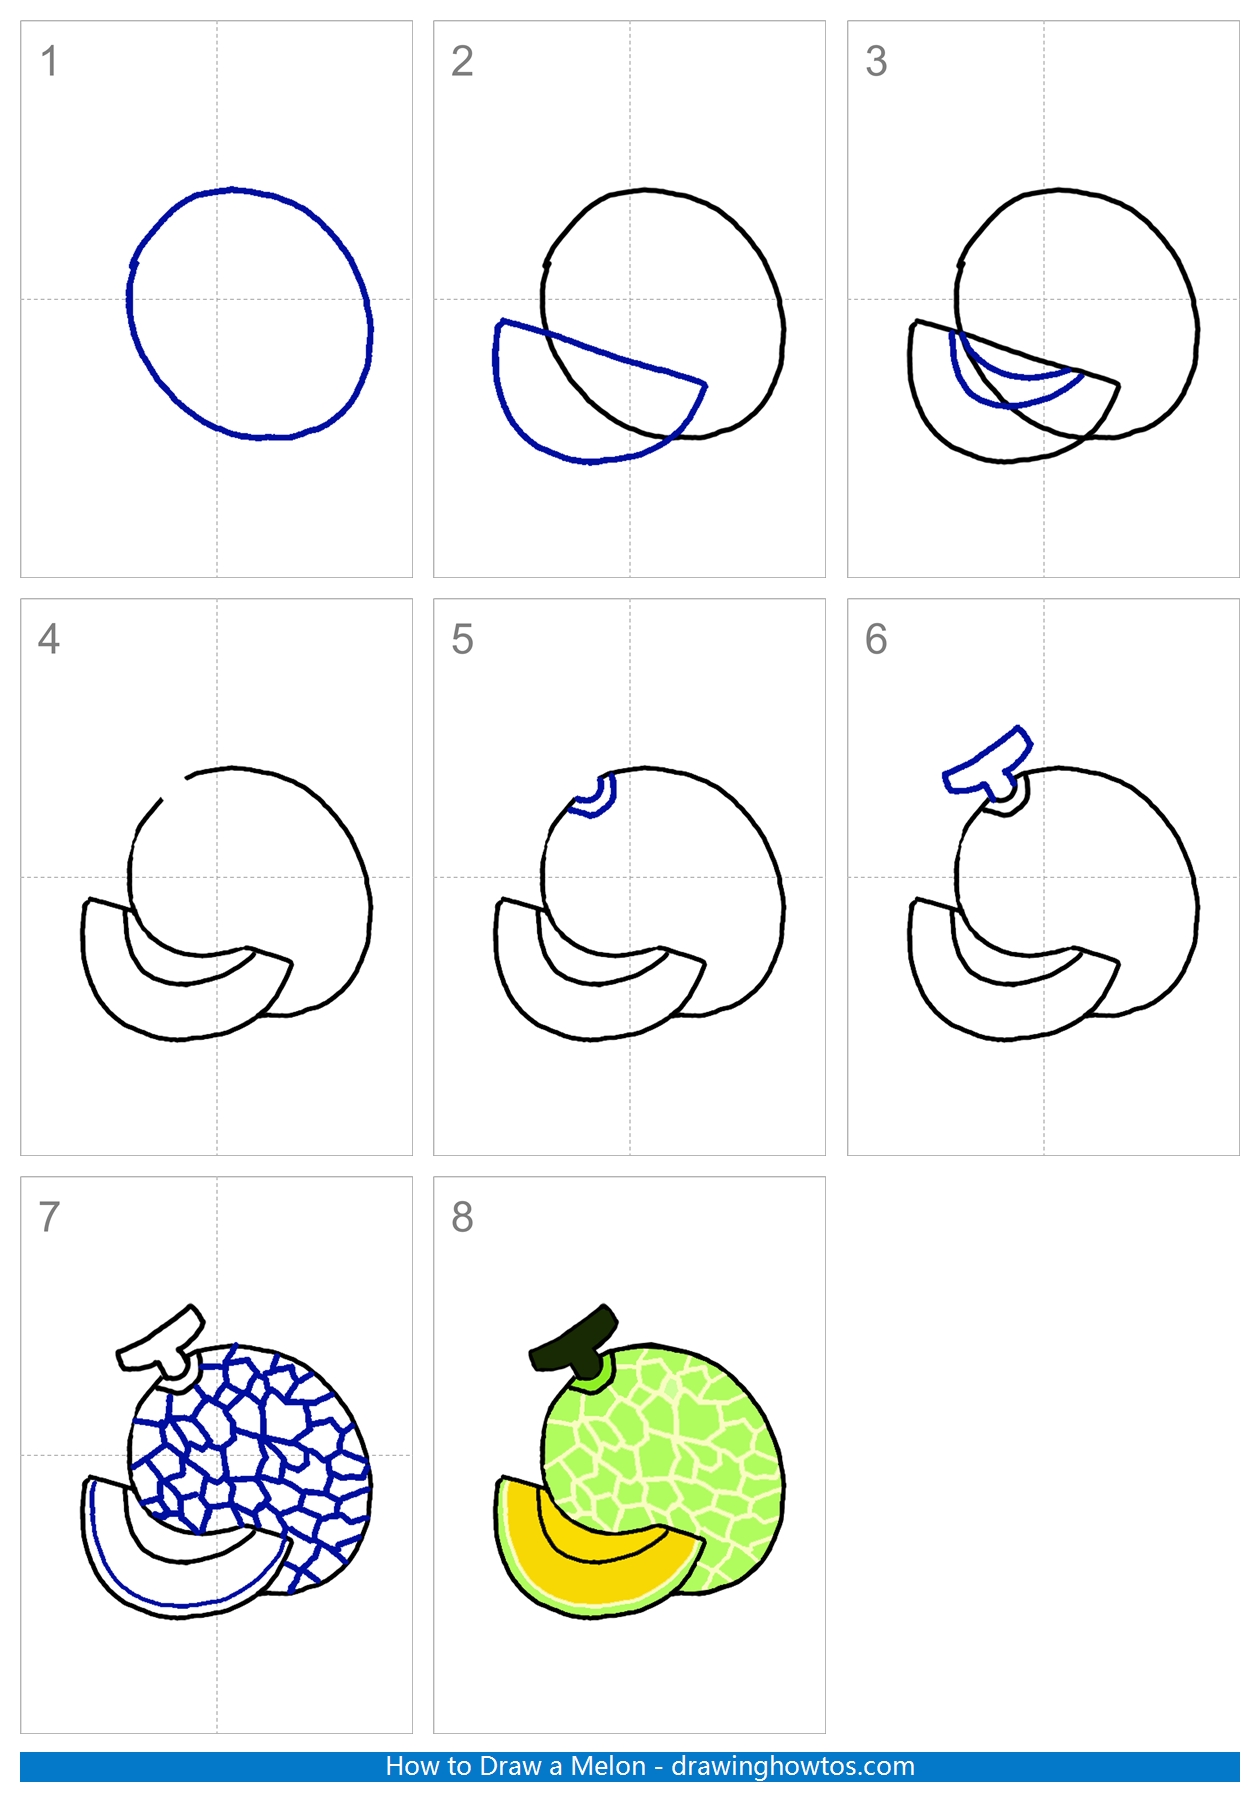 How to Draw a Cantaloupe Melon Step by Step